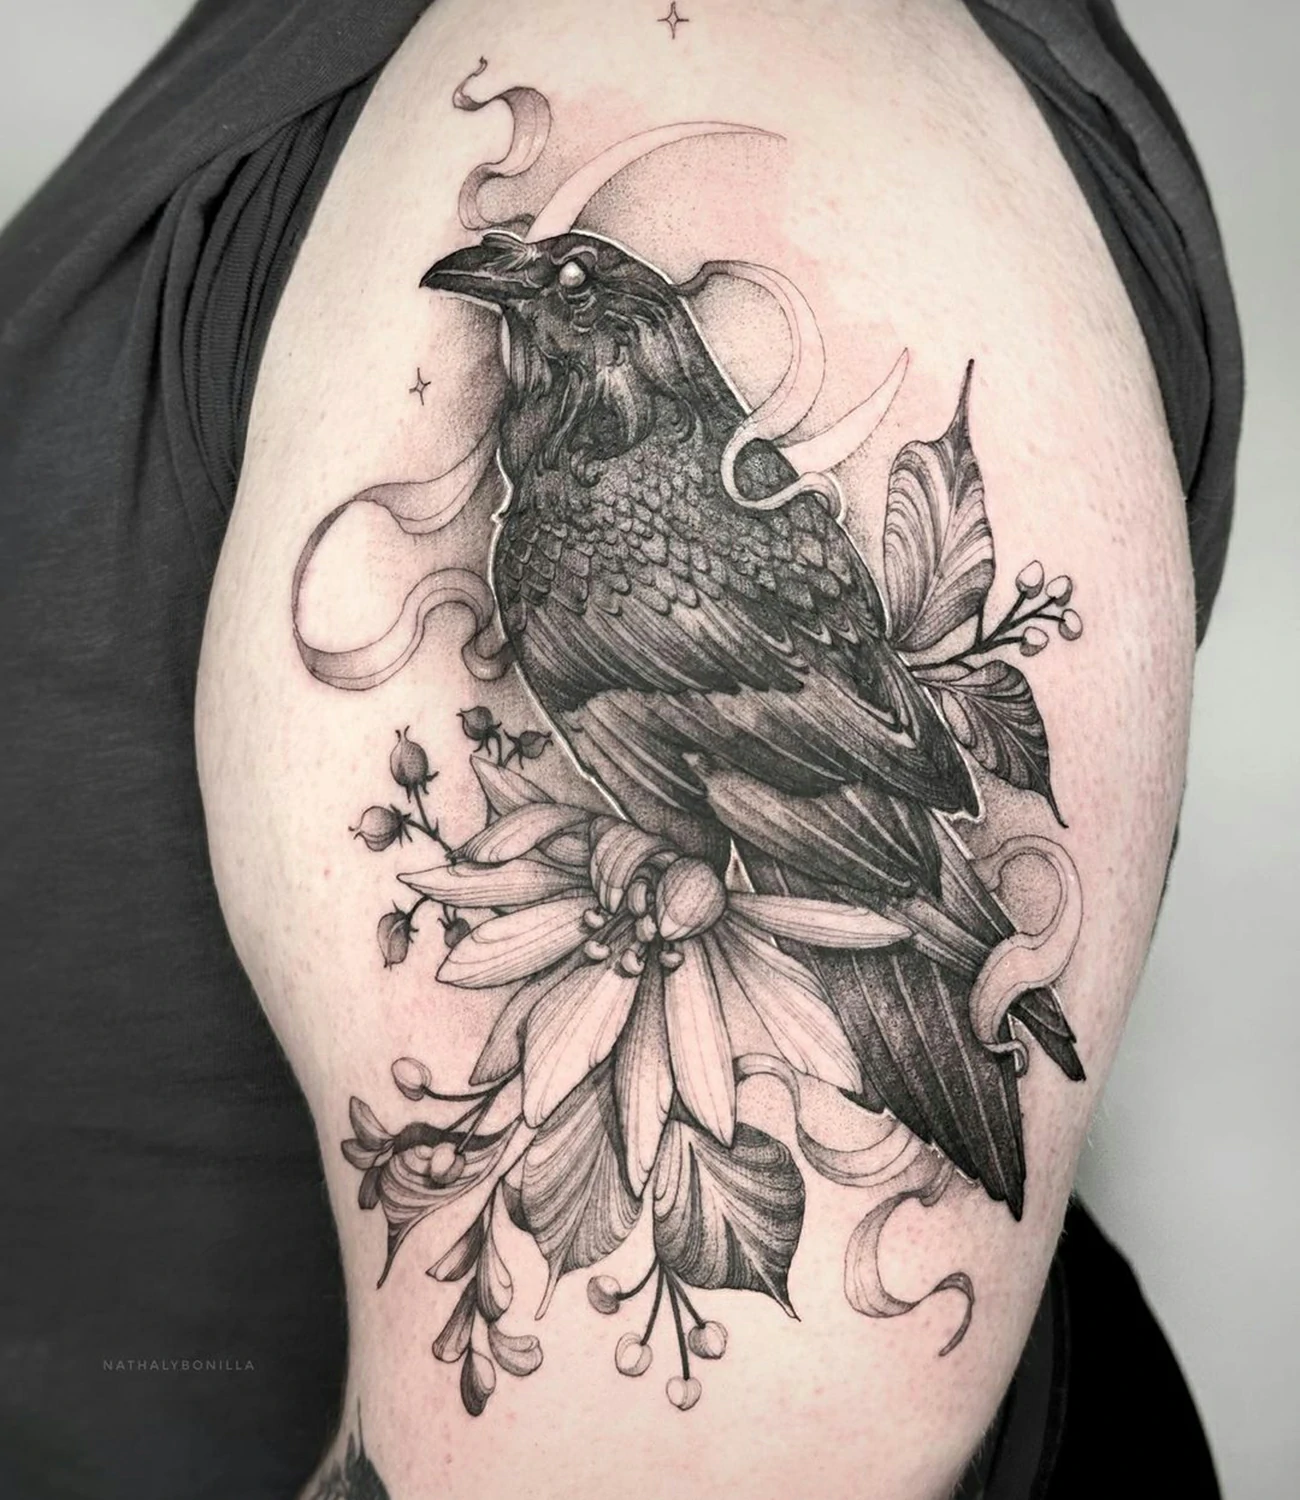 Raven arm tattoo: A versatile raven tattoo meant for placement on the arm.